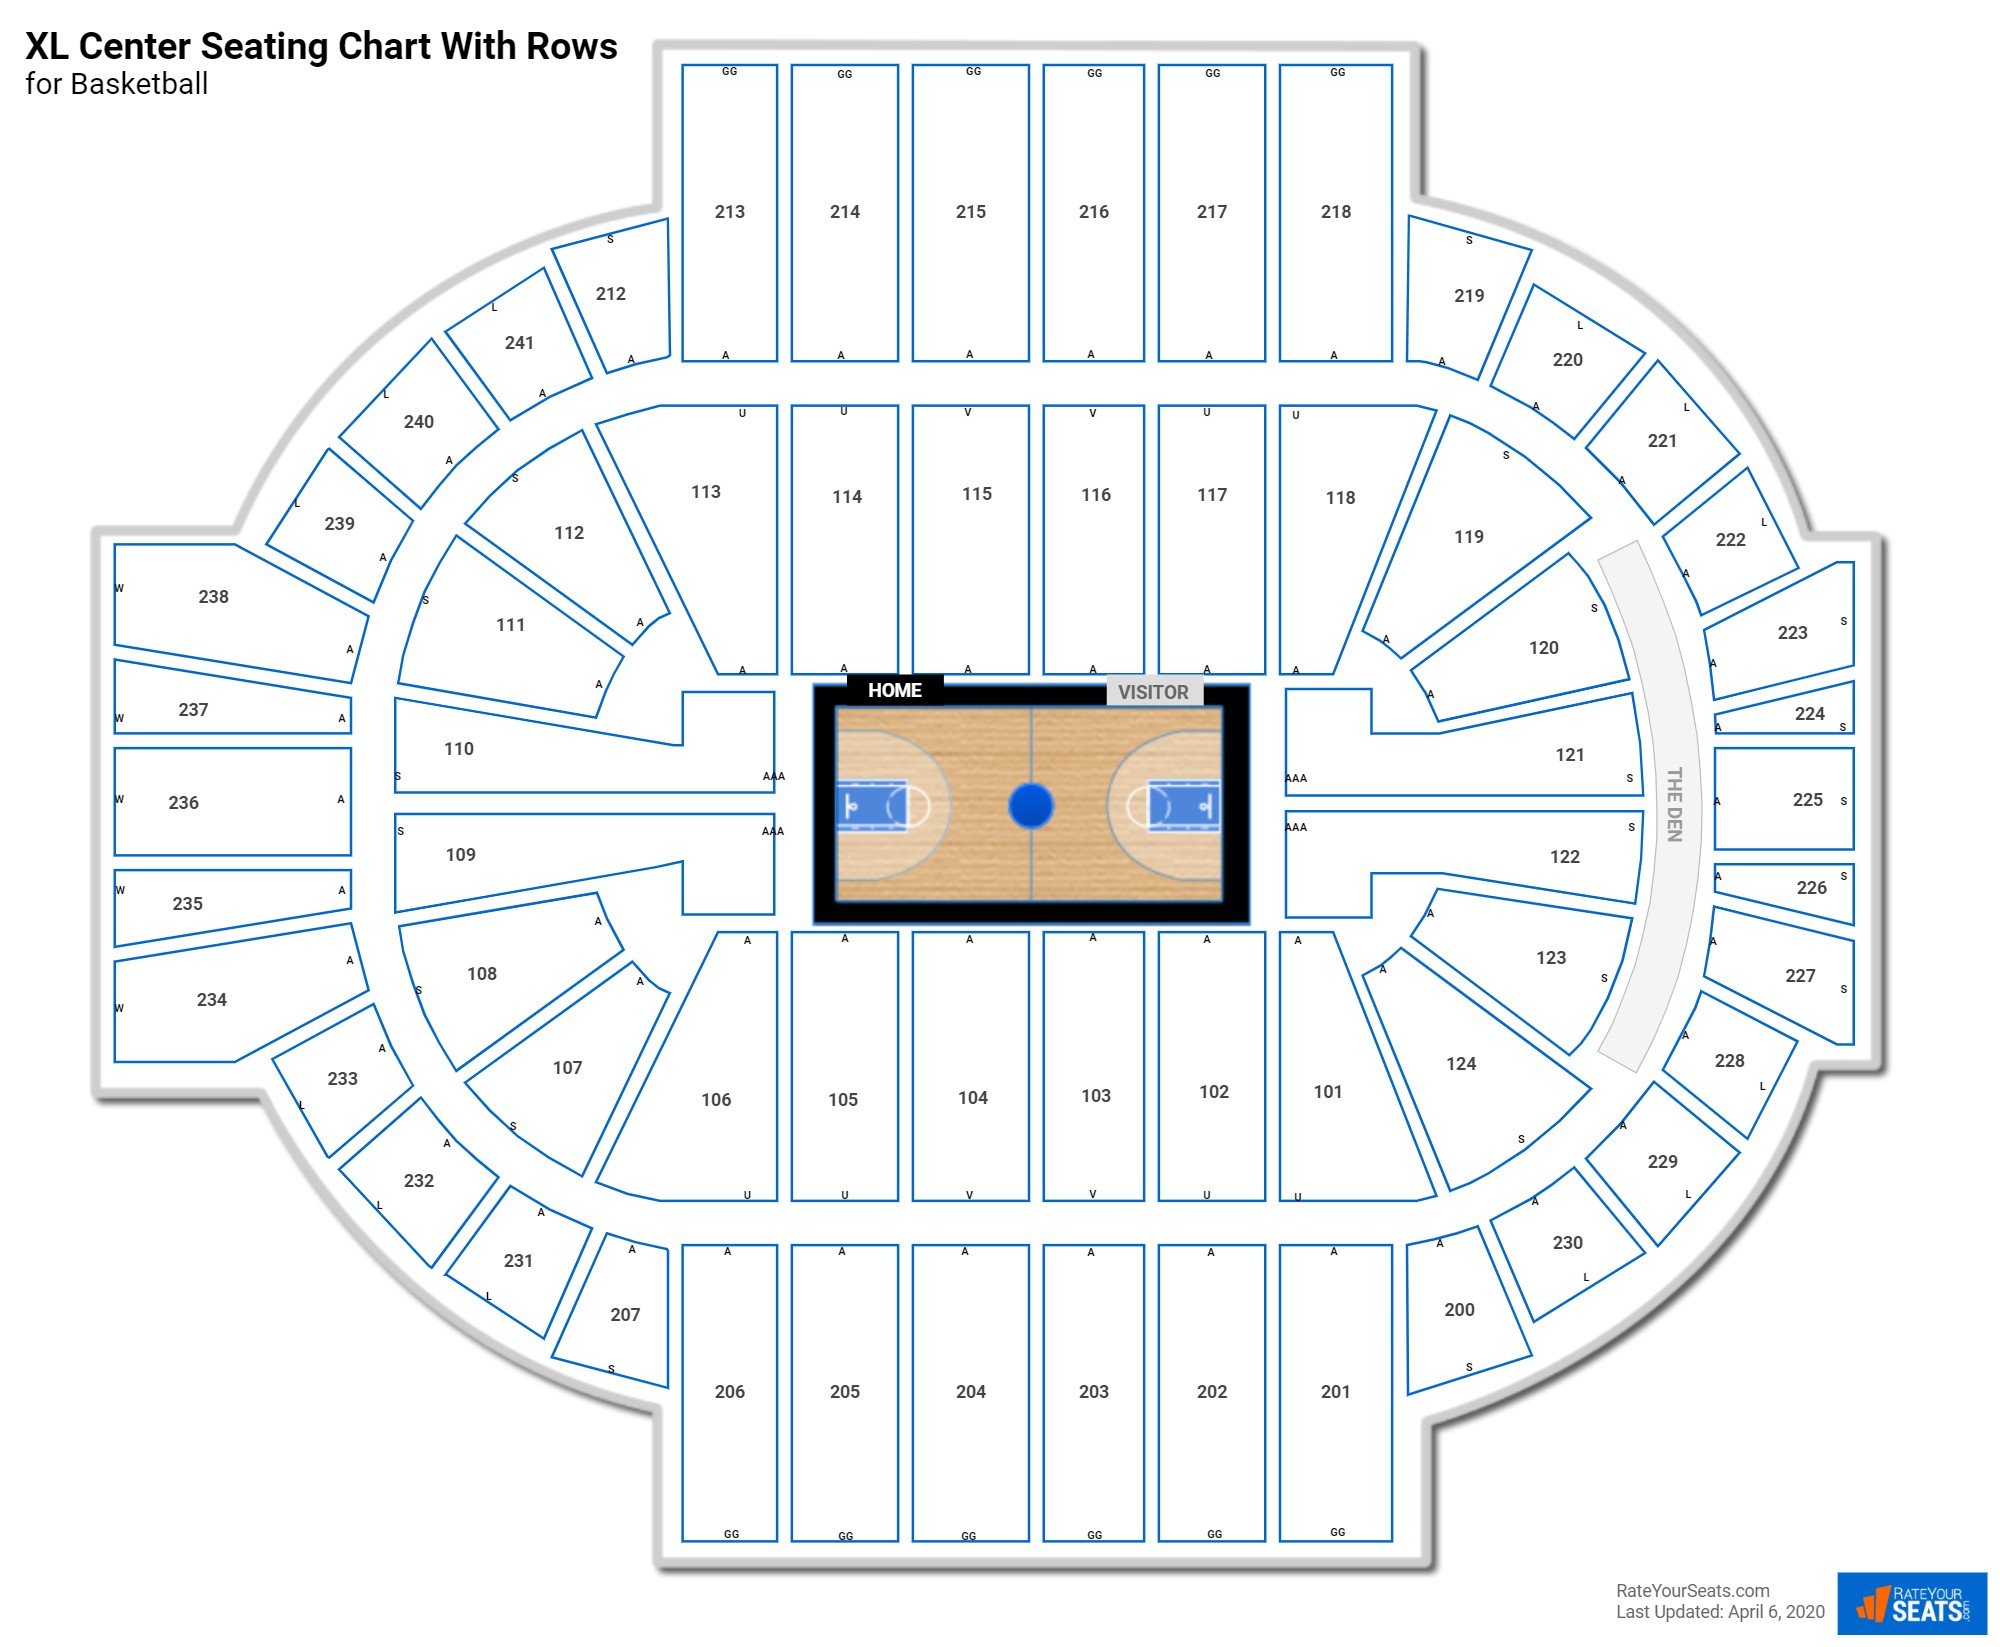 XL Center seating chart with row numbers